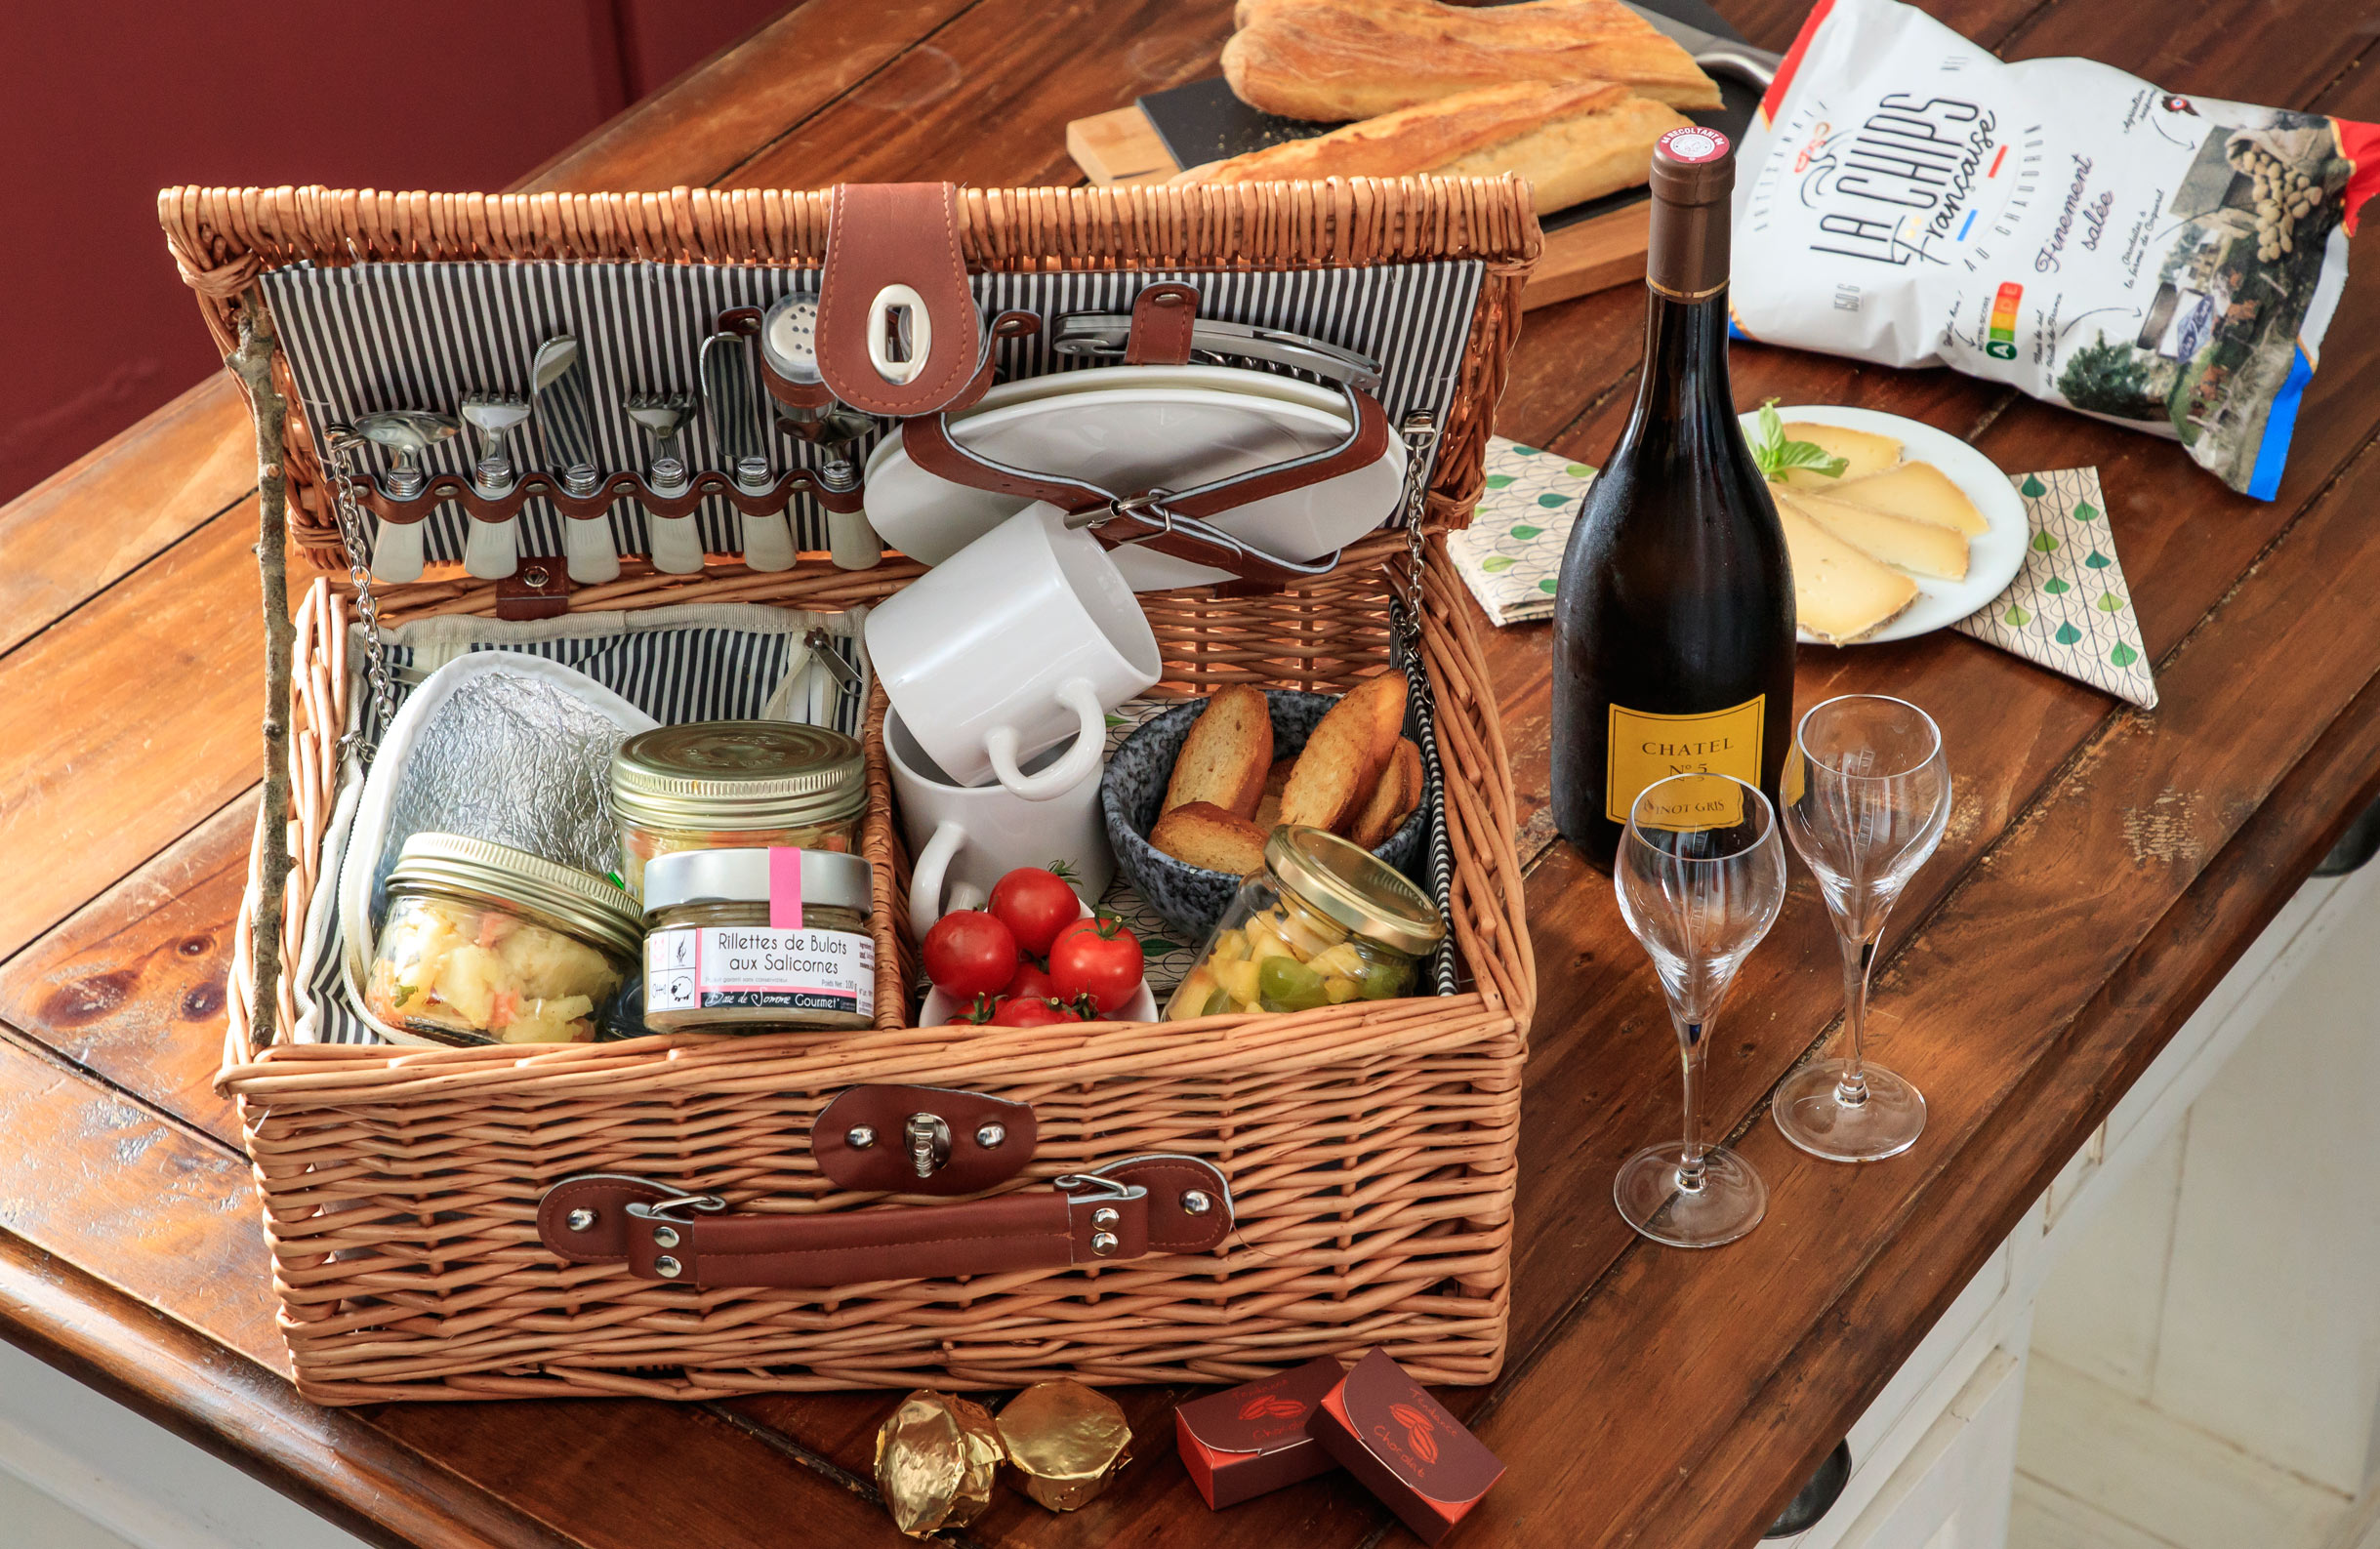 If you don't want to go out to eat, why not order a gourmet dinner hamper from your host at Villa Varentia?